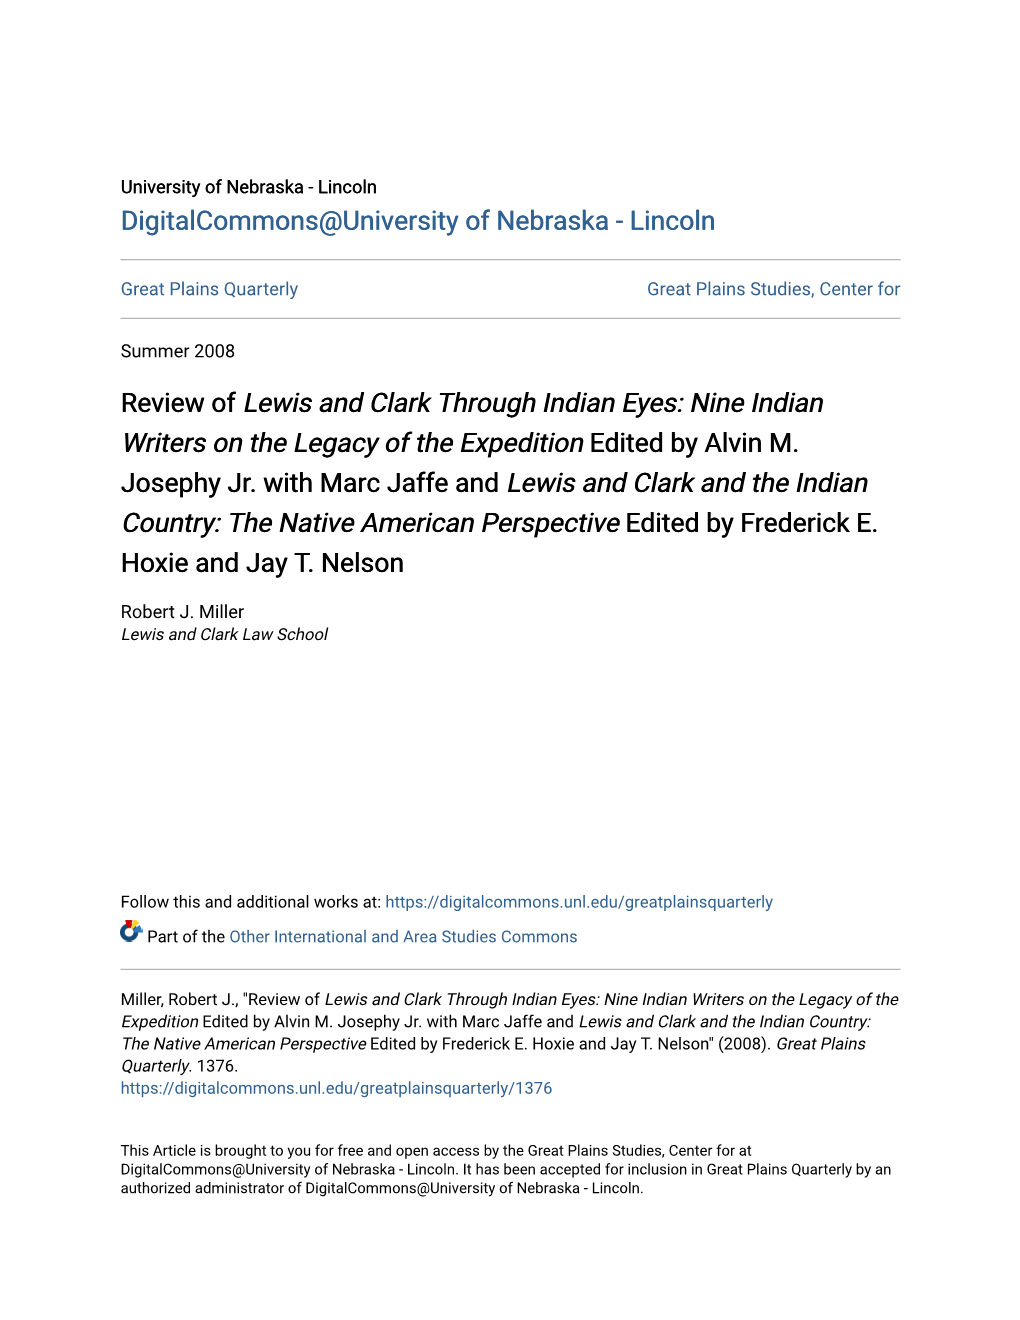 Review of Lewis and Clark Through Indian Eyes: Nine Indian Writers on the Legacy of the Expedition Edited by Alvin M